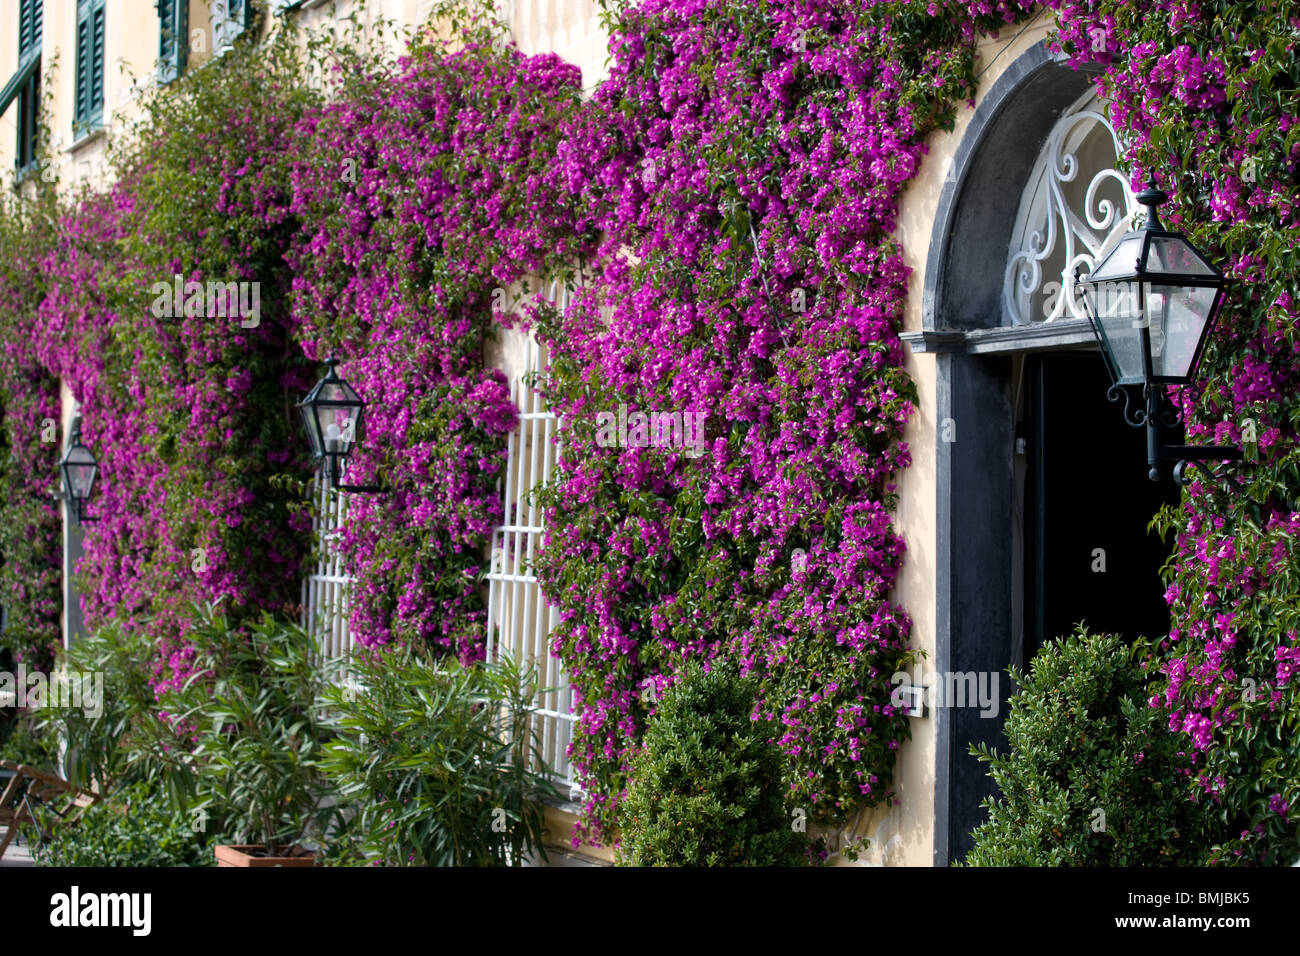 Italy, Liguria, house facade with flowers, bougainvillea and windows Stock Photo